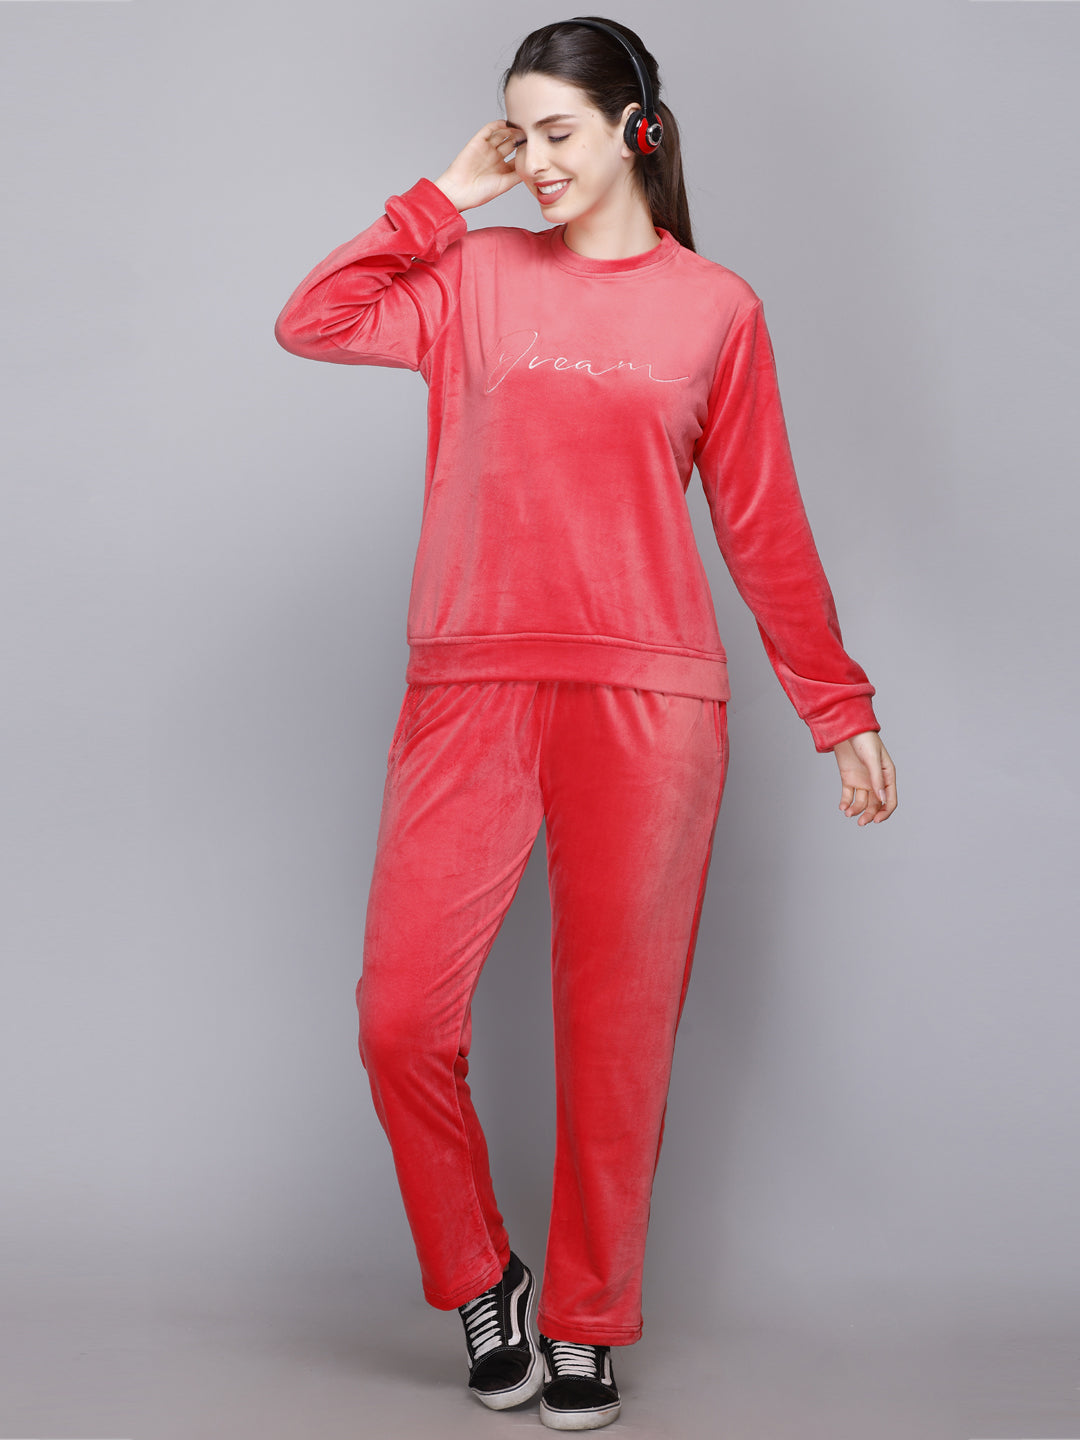 fcity.in - Women Solid Stripes Track Suit Women Striped Tracksuit Top  Leggings